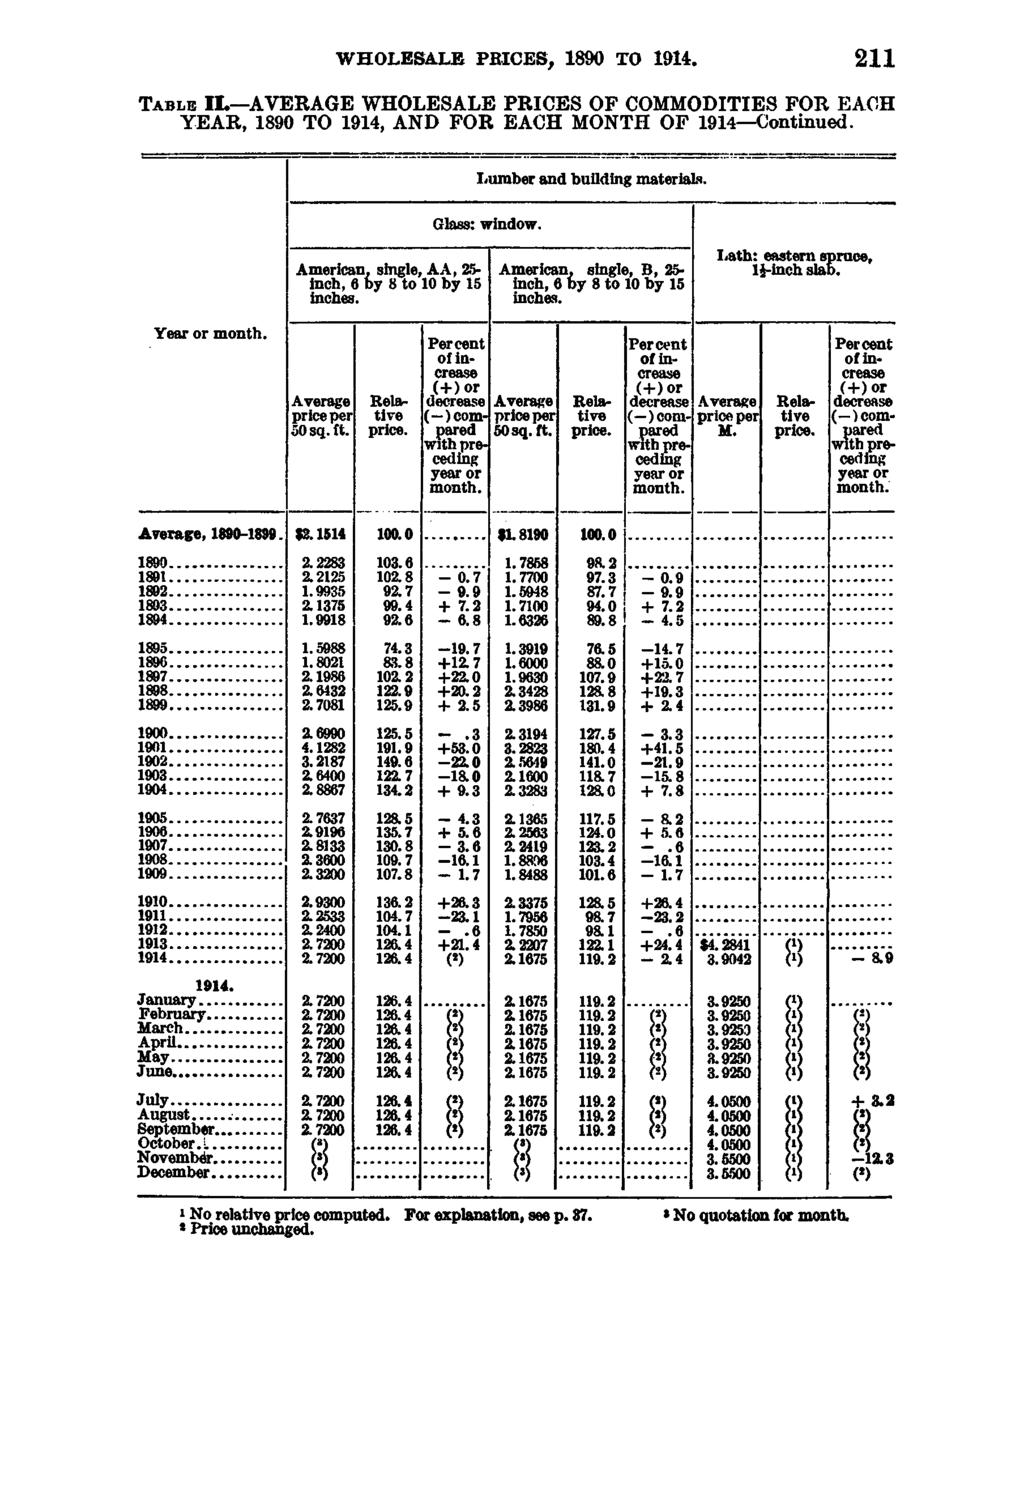 WHOLESALE PRICES, 1890 TO 211 T a b l e IL AVERAGE WHOLESALE PRICES OF COMMODITIES FOR EACH YEAR, 1890 TO 1914, AND FOR EACH MONTH OF 1914 Continued. Lumber and building materials. Glass: window.